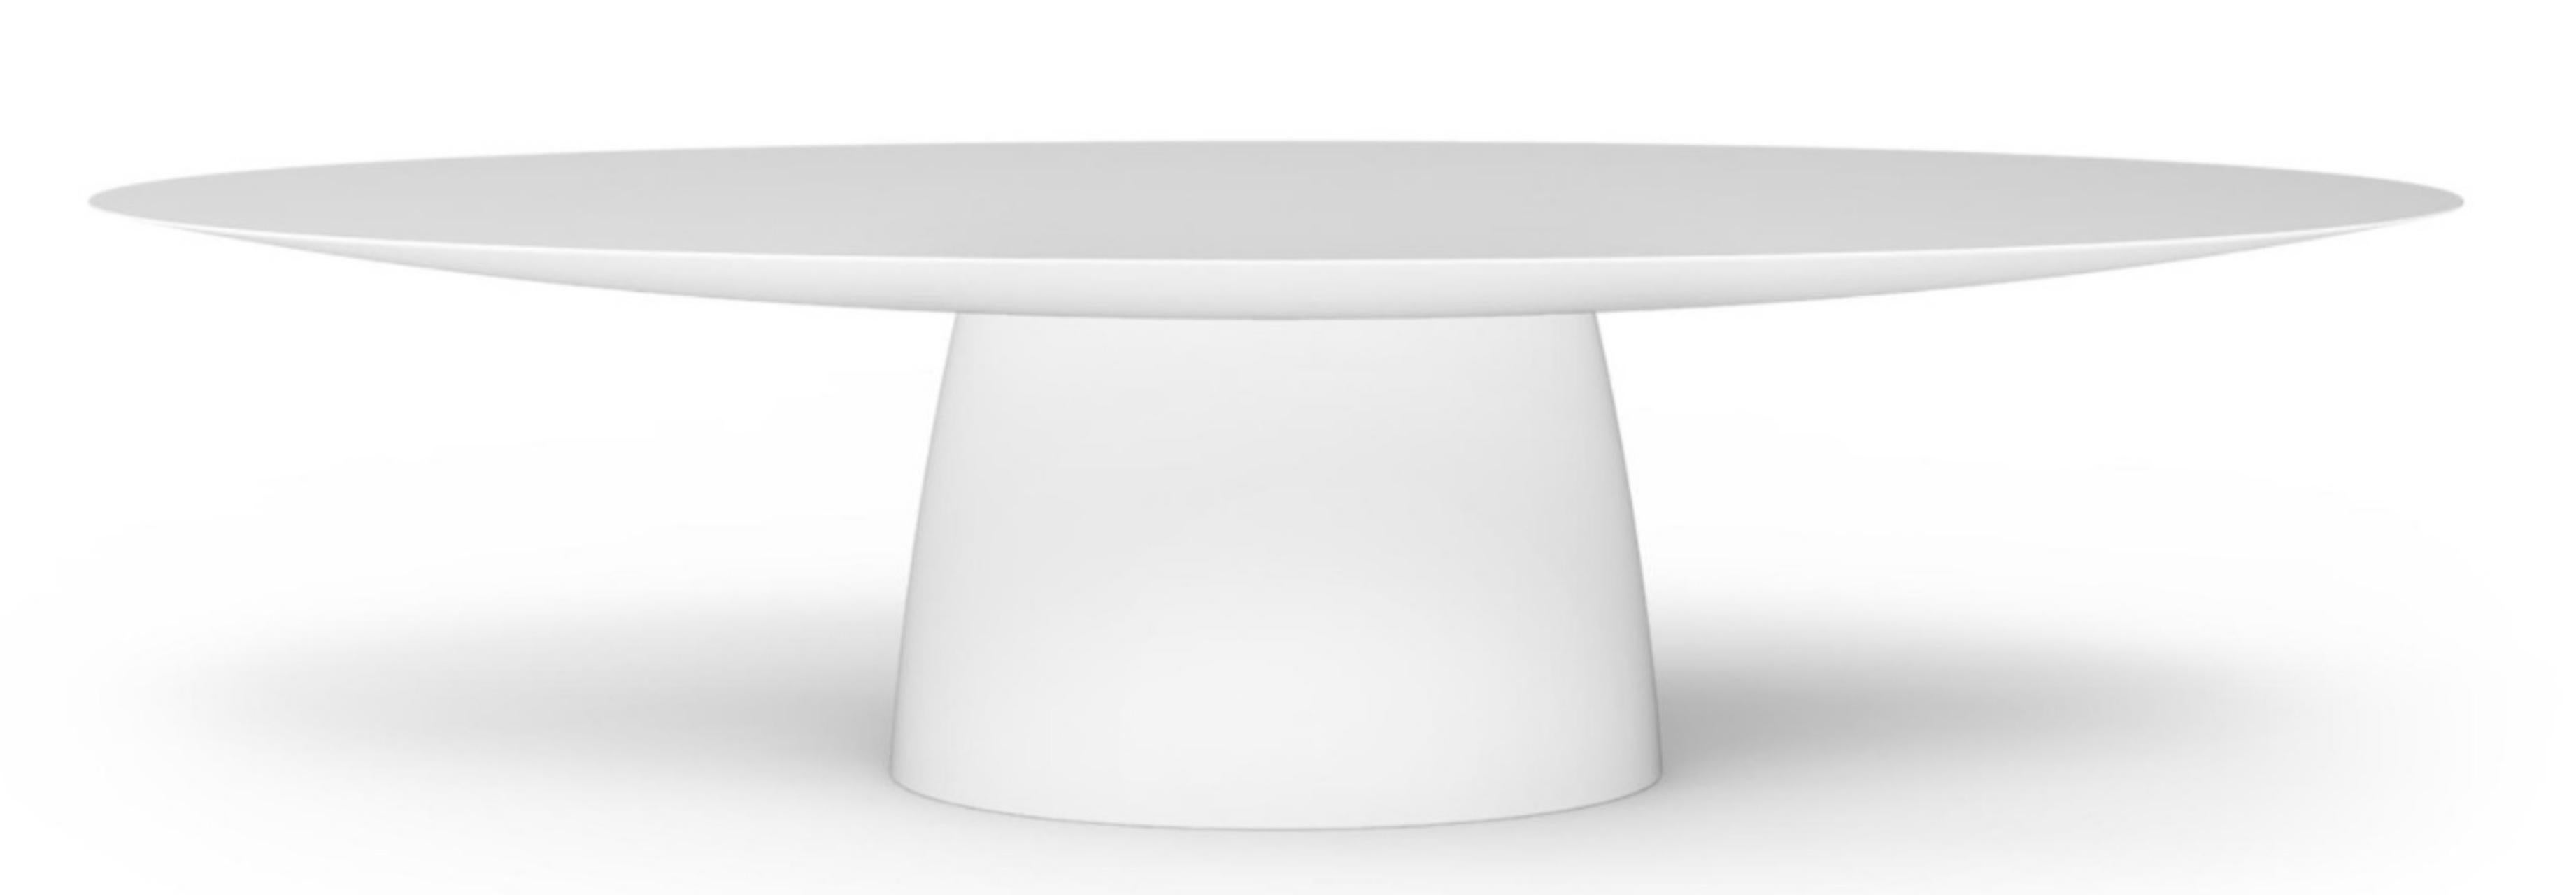 Dining table.

General information.

Dimensions (cm): 300 x 130 x 75.
Dimensions (in): 118.1 x 51.2 x 29.5.
weight (kg): 85
weight (lbs): 187.4
seat: 8 to 10

Materials and colors.

Structure: resin reinforced with fiberglass, lacquered